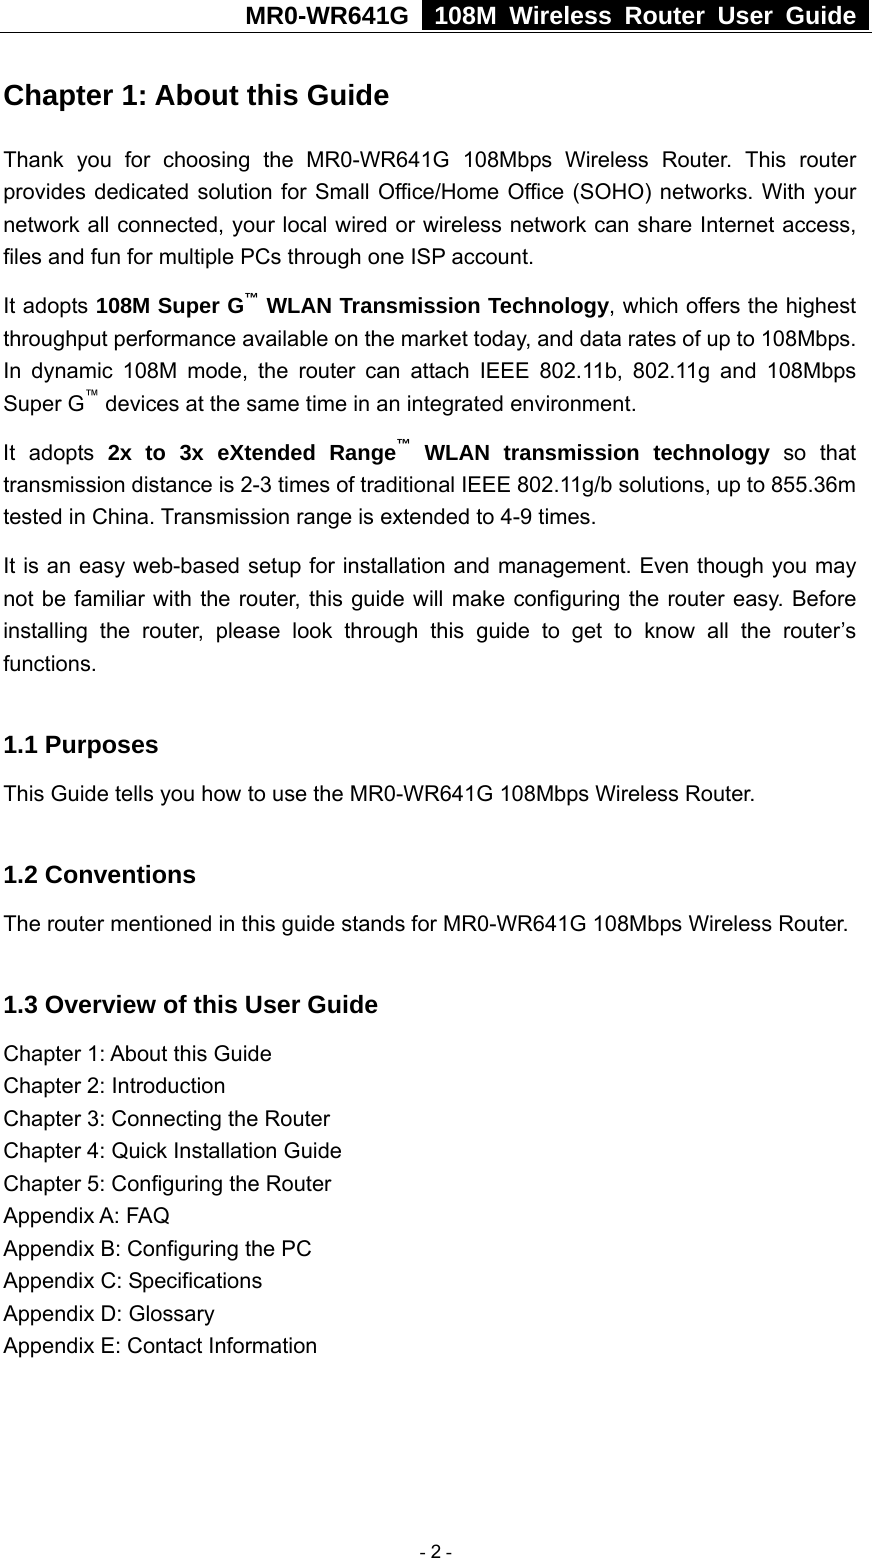 MR0-WR641G   108M Wireless Router User Guide  Chapter 1: About this Guide Thank you for choosing the MR0-WR641G 108Mbps Wireless Router. This router provides dedicated solution for Small Office/Home Office (SOHO) networks. With your network all connected, your local wired or wireless network can share Internet access, files and fun for multiple PCs through one ISP account.     It adopts 108M Super G™ WLAN Transmission Technology, which offers the highest throughput performance available on the market today, and data rates of up to 108Mbps. In dynamic 108M mode, the router can attach IEEE 802.11b, 802.11g and 108Mbps Super G™ devices at the same time in an integrated environment. It adopts 2x to 3x eXtended Range™ WLAN transmission technology so that transmission distance is 2-3 times of traditional IEEE 802.11g/b solutions, up to 855.36m tested in China. Transmission range is extended to 4-9 times. It is an easy web-based setup for installation and management. Even though you may not be familiar with the router, this guide will make configuring the router easy. Before installing the router, please look through this guide to get to know all the router’s functions.  1.1 Purposes This Guide tells you how to use the MR0-WR641G 108Mbps Wireless Router.    1.2 Conventions The router mentioned in this guide stands for MR0-WR641G 108Mbps Wireless Router.  1.3 Overview of this User Guide Chapter 1: About this Guide Chapter 2: Introduction Chapter 3: Connecting the Router Chapter 4: Quick Installation Guide Chapter 5: Configuring the Router Appendix A: FAQ Appendix B: Configuring the PC Appendix C: Specifications Appendix D: Glossary Appendix E: Contact Information  - 2 - 